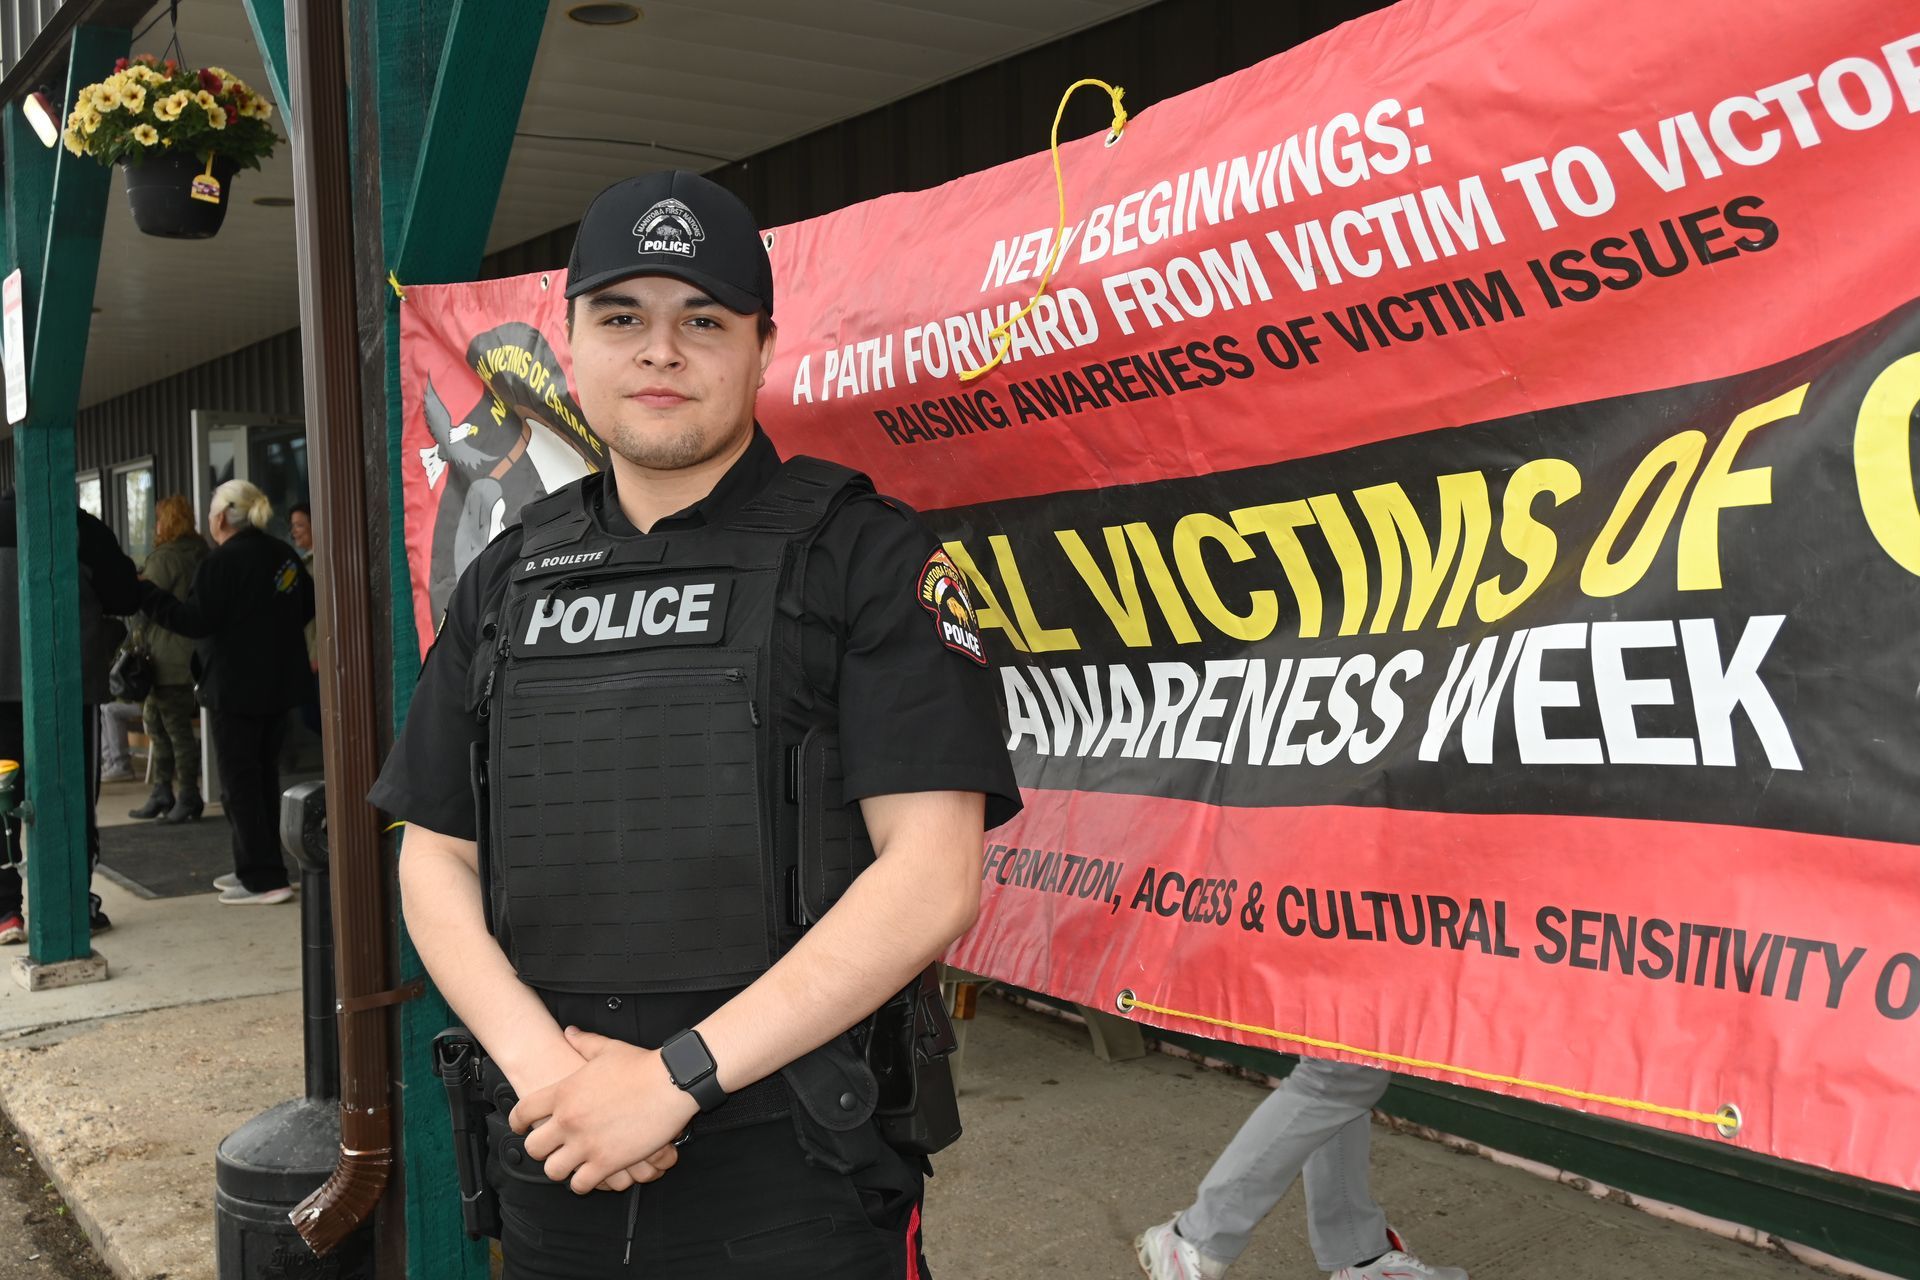 MFNPS-Manitoba First Nations Police Service Officer in front of Victim Crimes banner